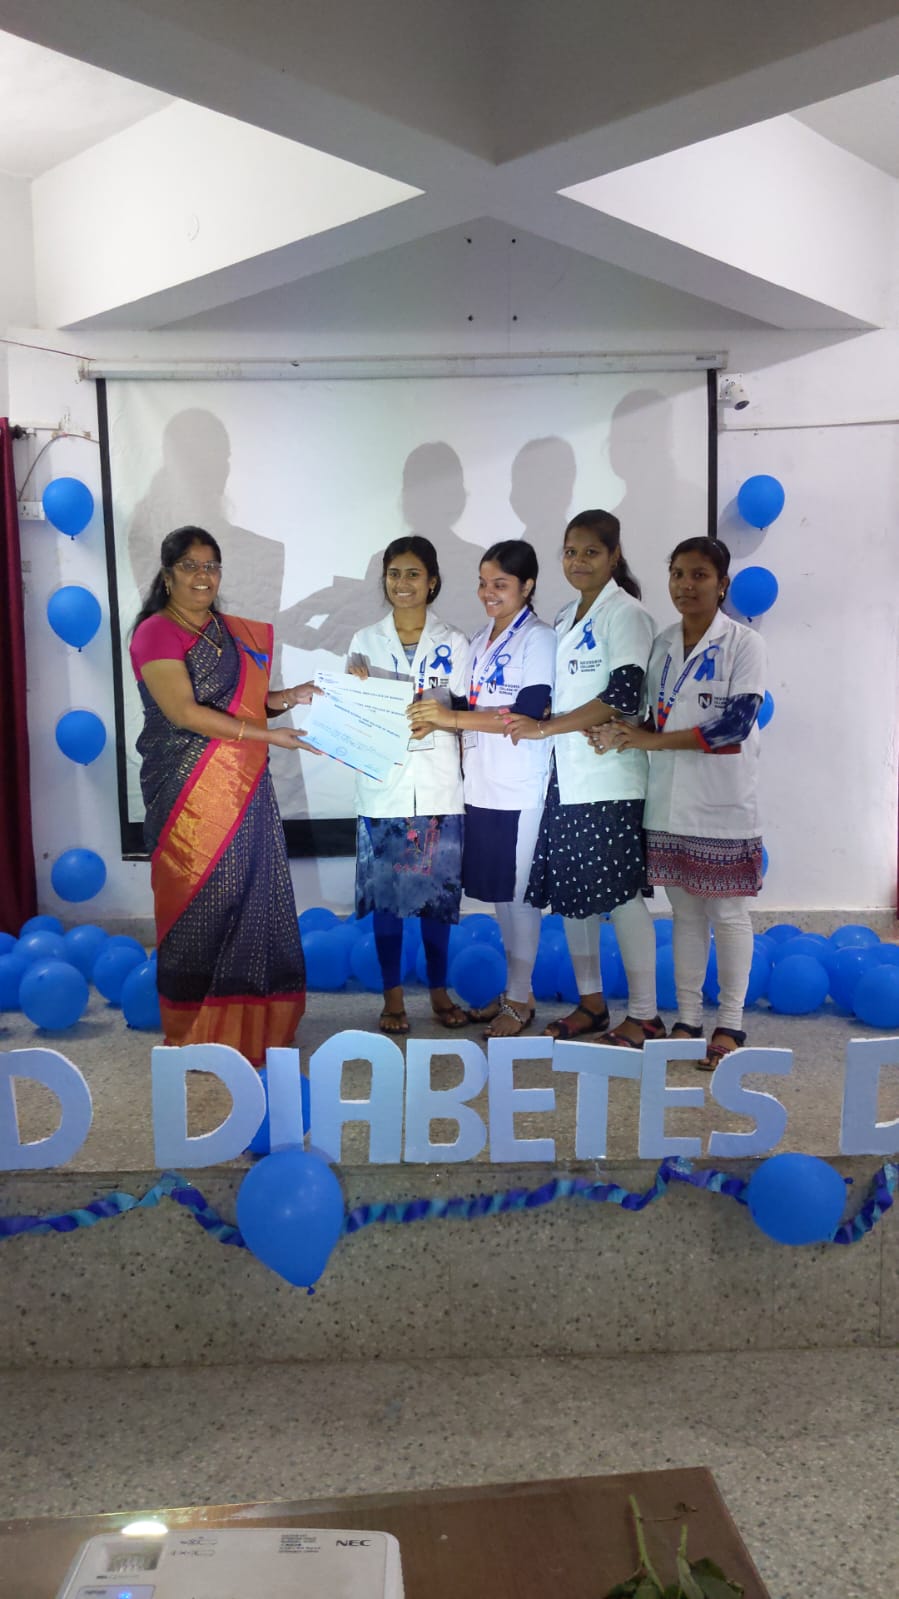 “REELS CONTEST” organized by Navodaya College of Nursing on account World Diabetes Day